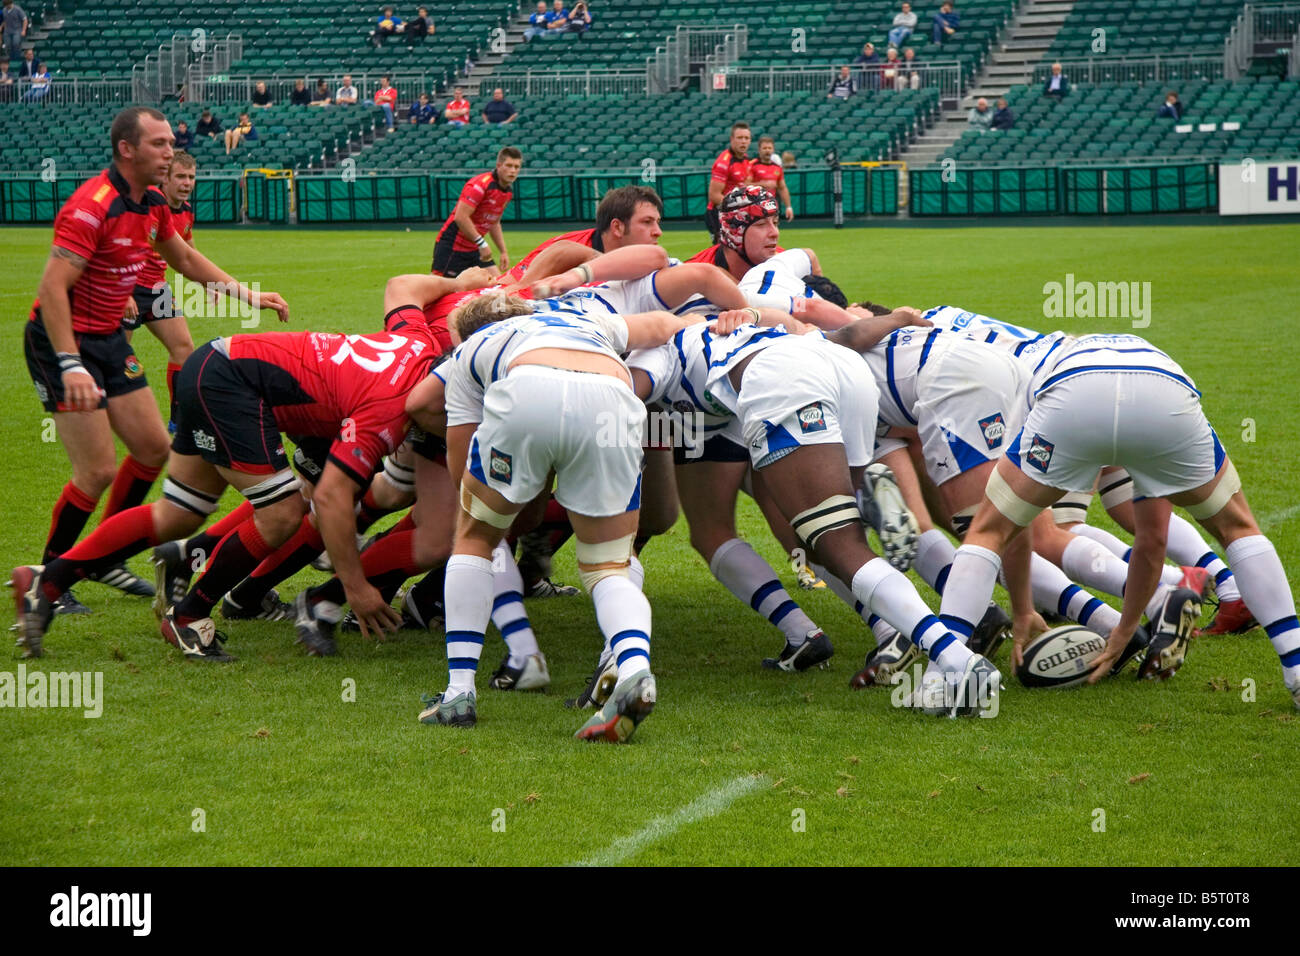 Men play a game of rugby in the city of Bath Somerset England Stock Photo